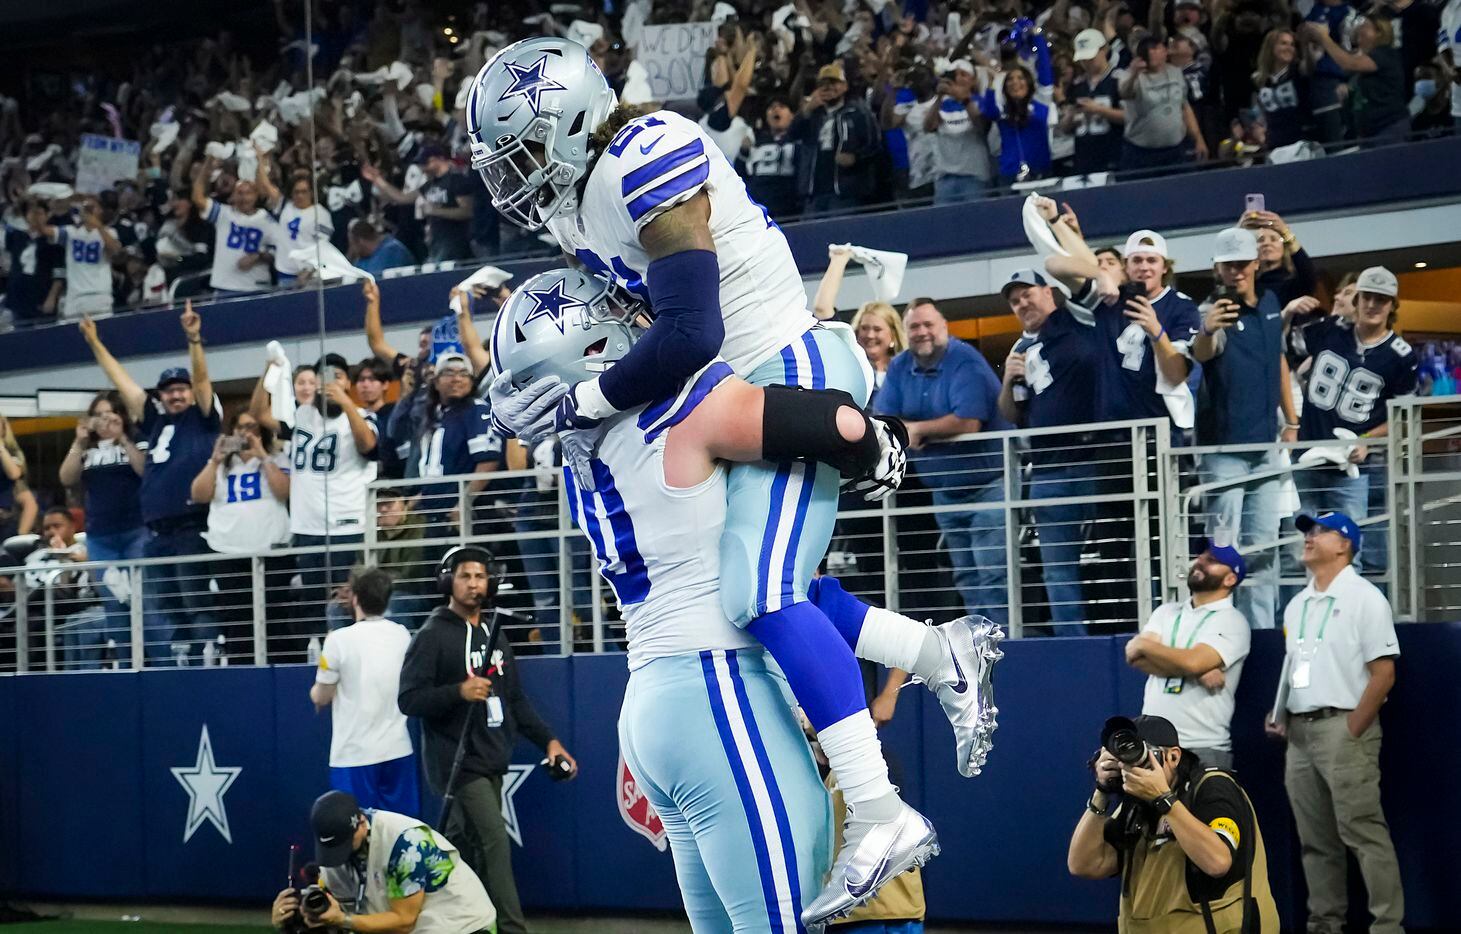 Dallas Cowboys running back Ezekiel Elliott (21) celebrates with guard Zack Martin (70) after scoring on a pass receptions during the first half of an NFL football game against the Washington Football Team at AT&T Stadium on Sunday, Dec. 26, 2021, in Arlington.